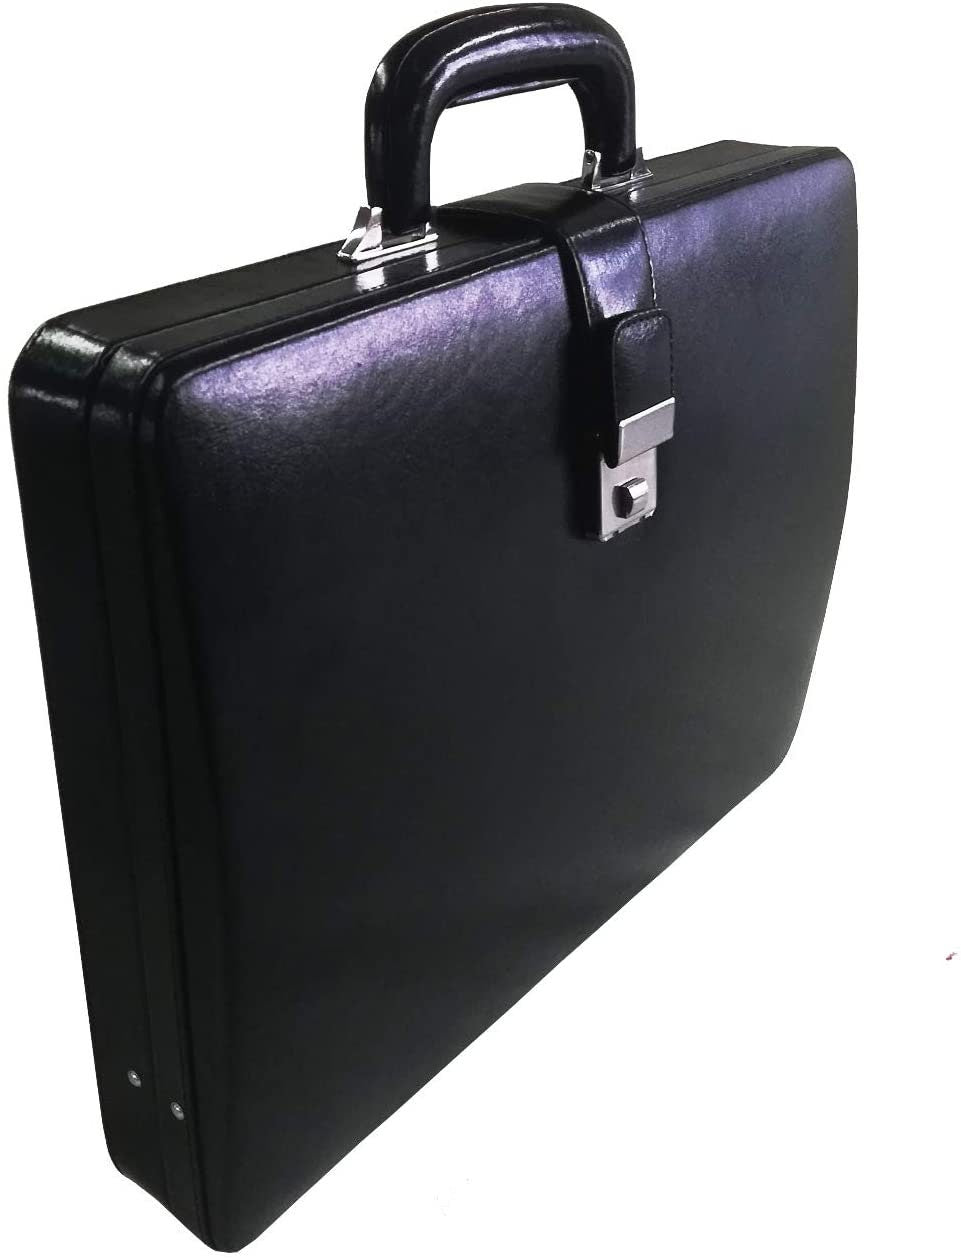 Genuine Leather Attache Briefcase for Men's Office Handbag Doctor Briefcase Leather Laptop MacBook Carry Case (Silver Fittings)